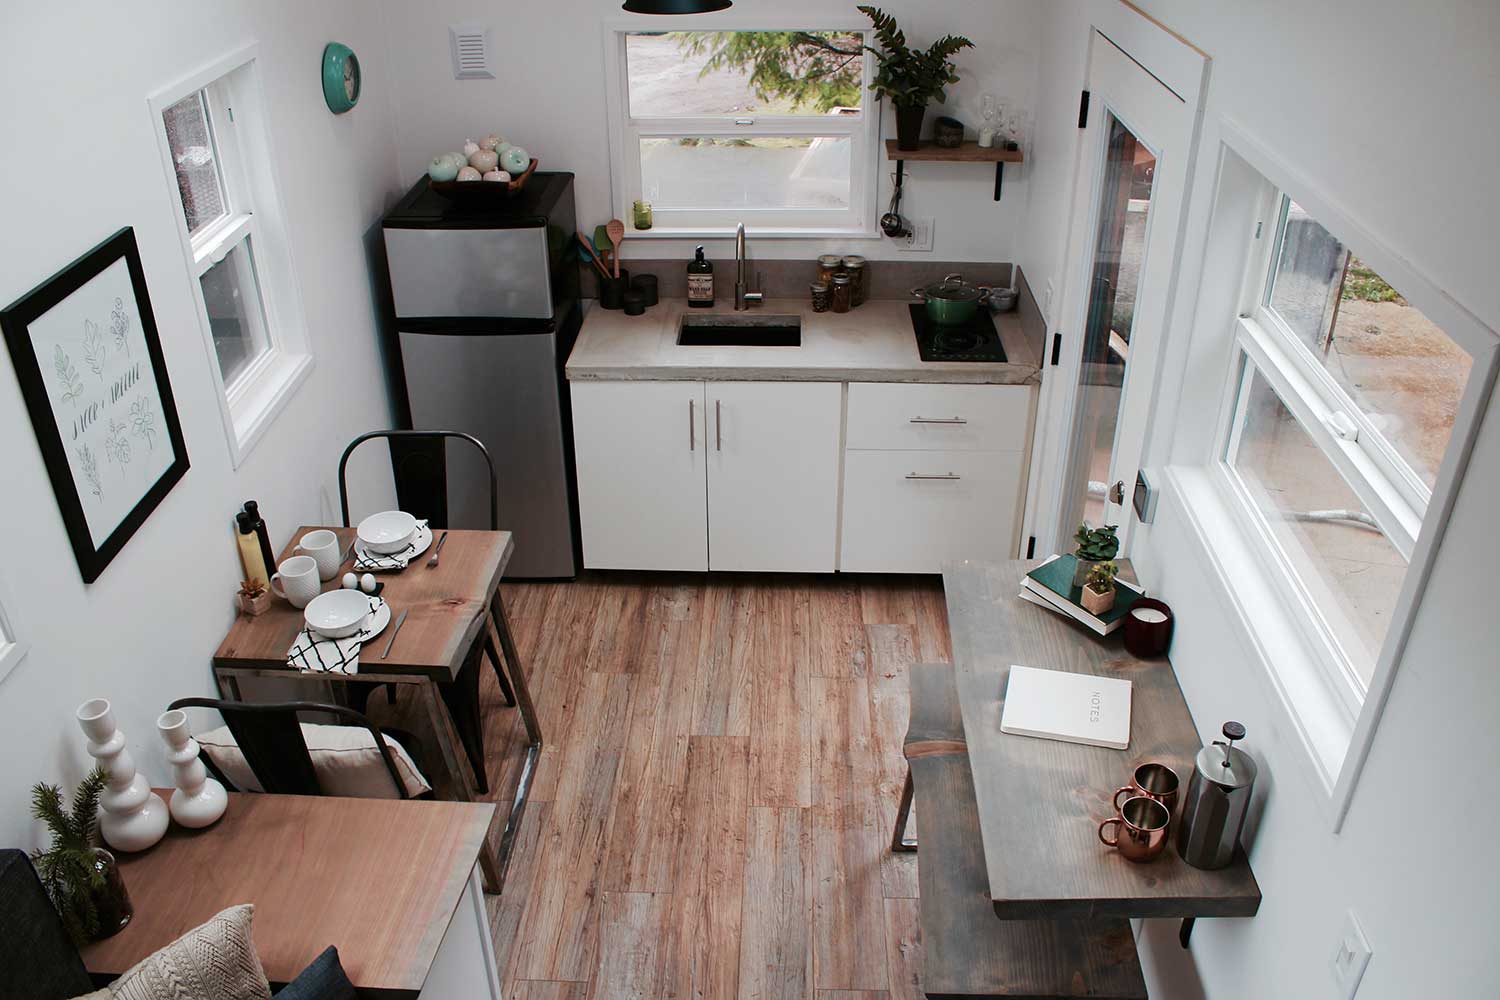 THe Midcentury Modern Tiny Home's kitchen